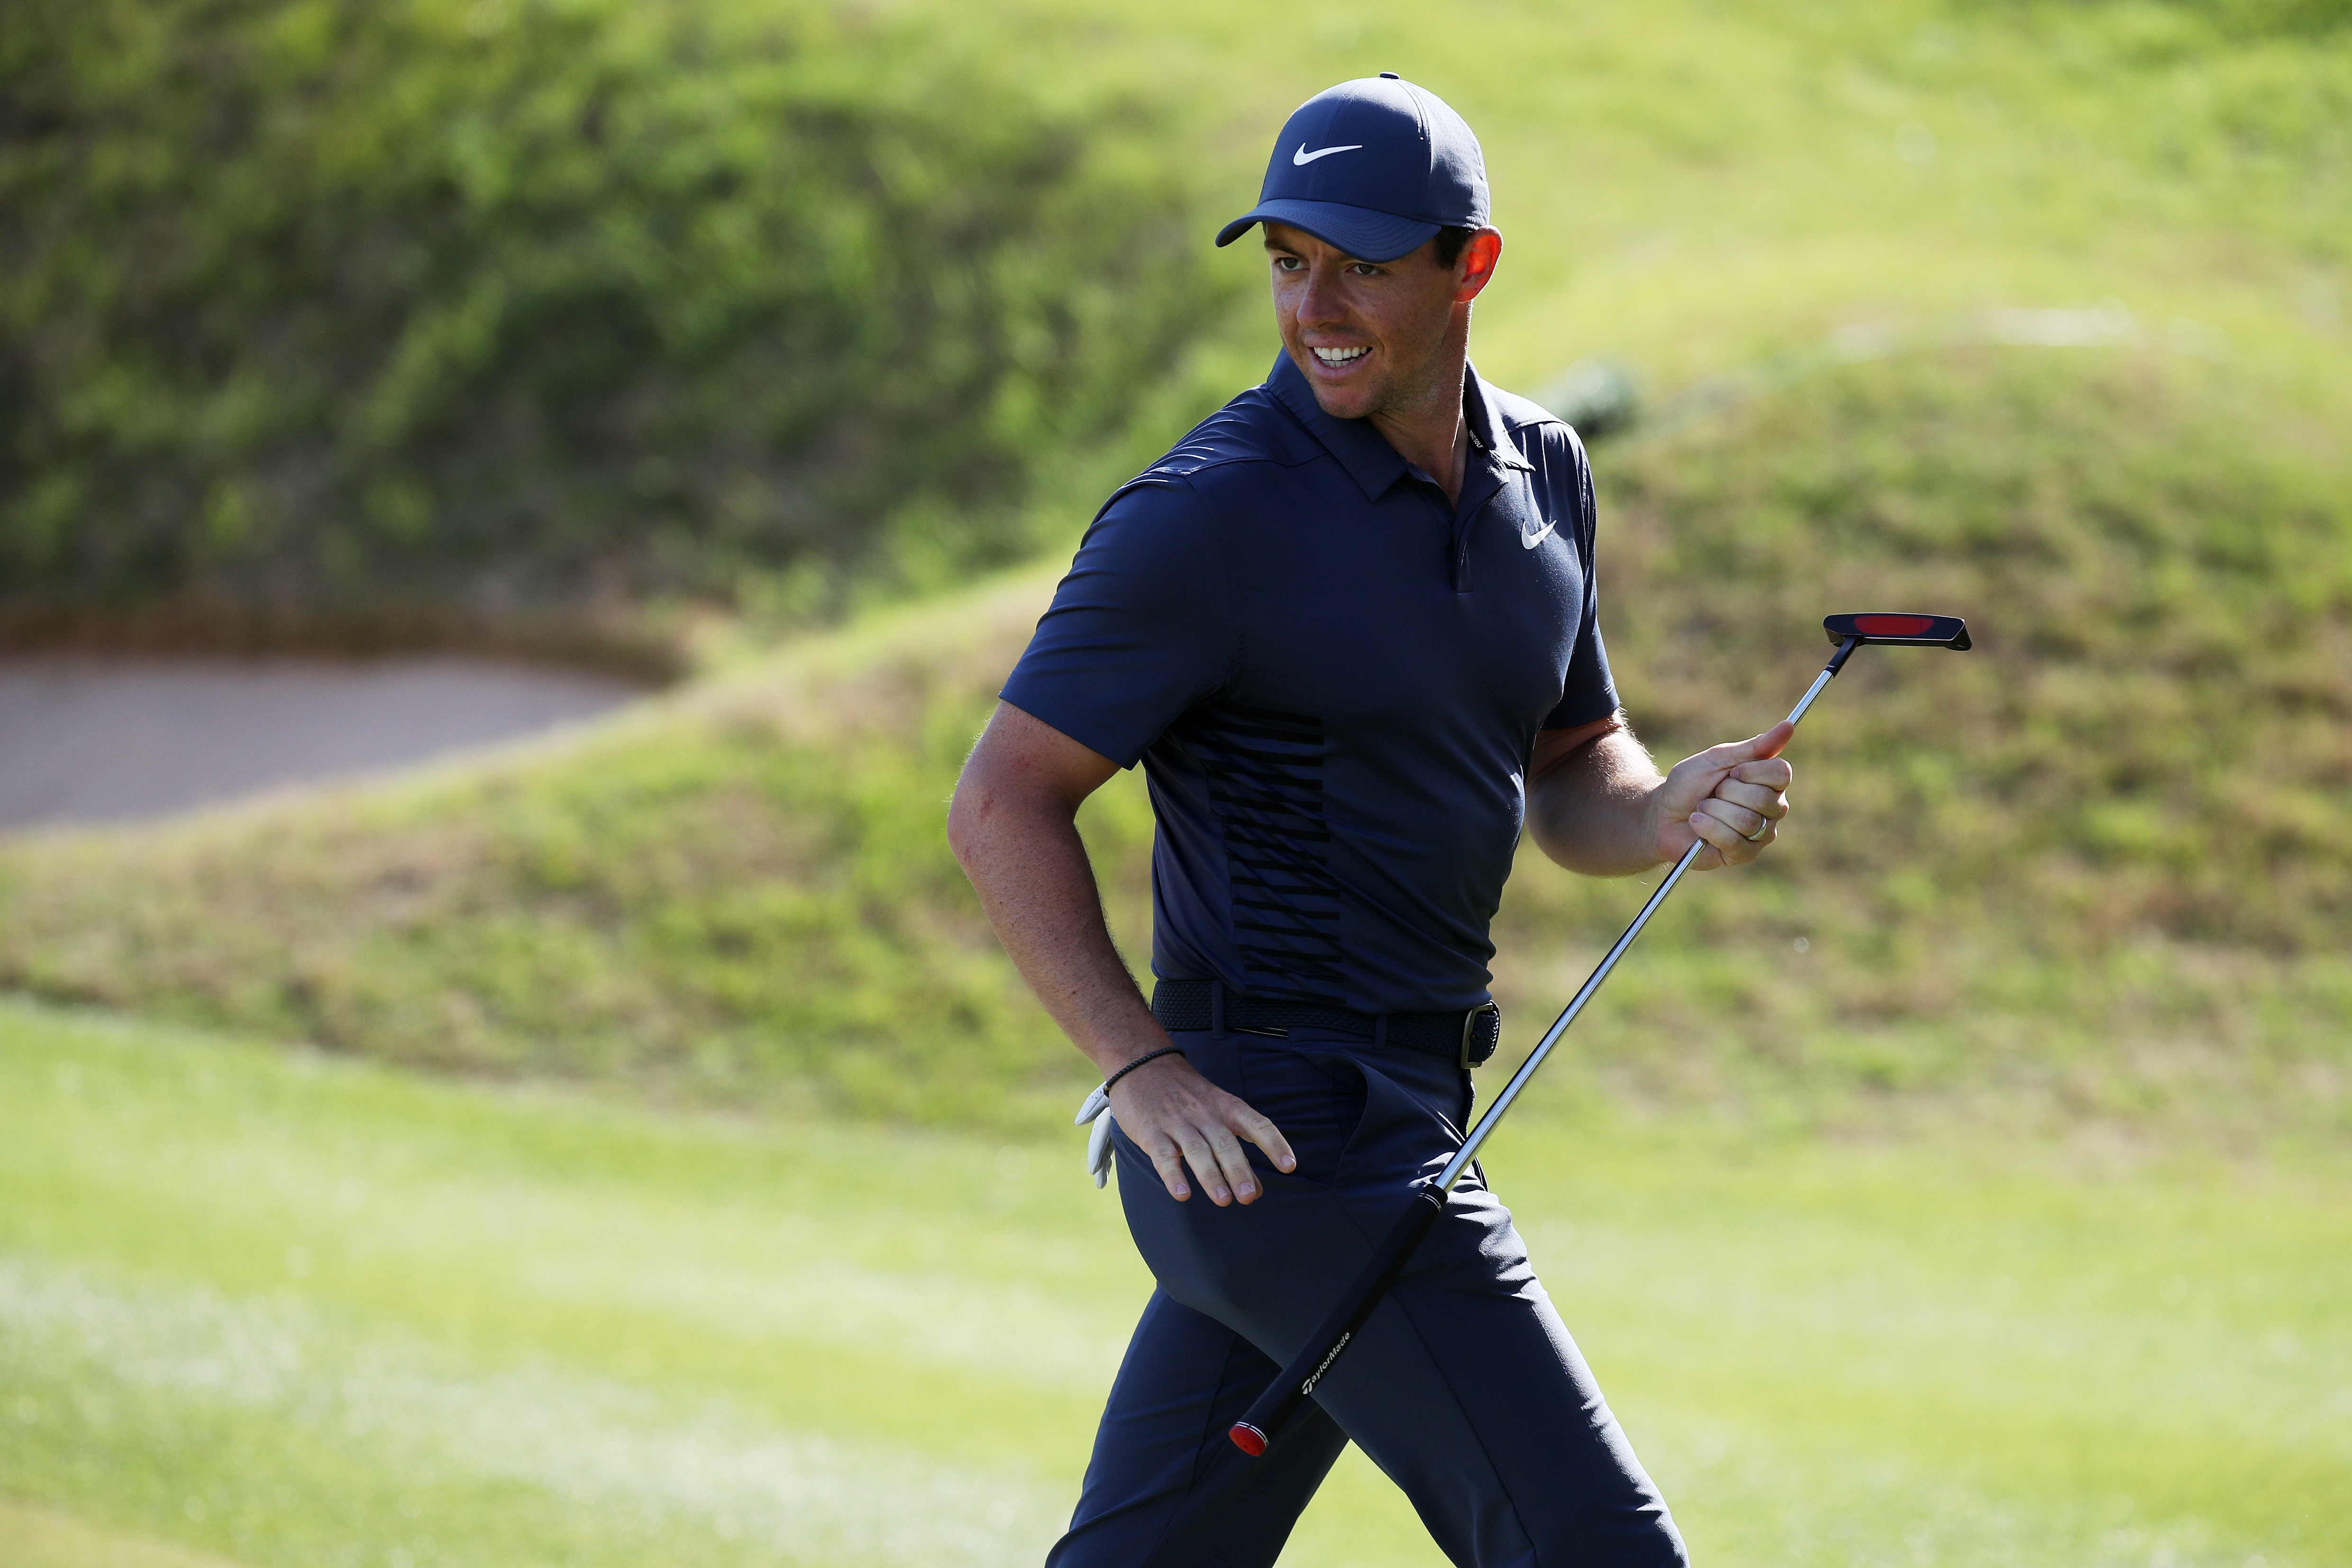 Rory McIlroy: My new TaylorMade putter will stay in the bag for a while!